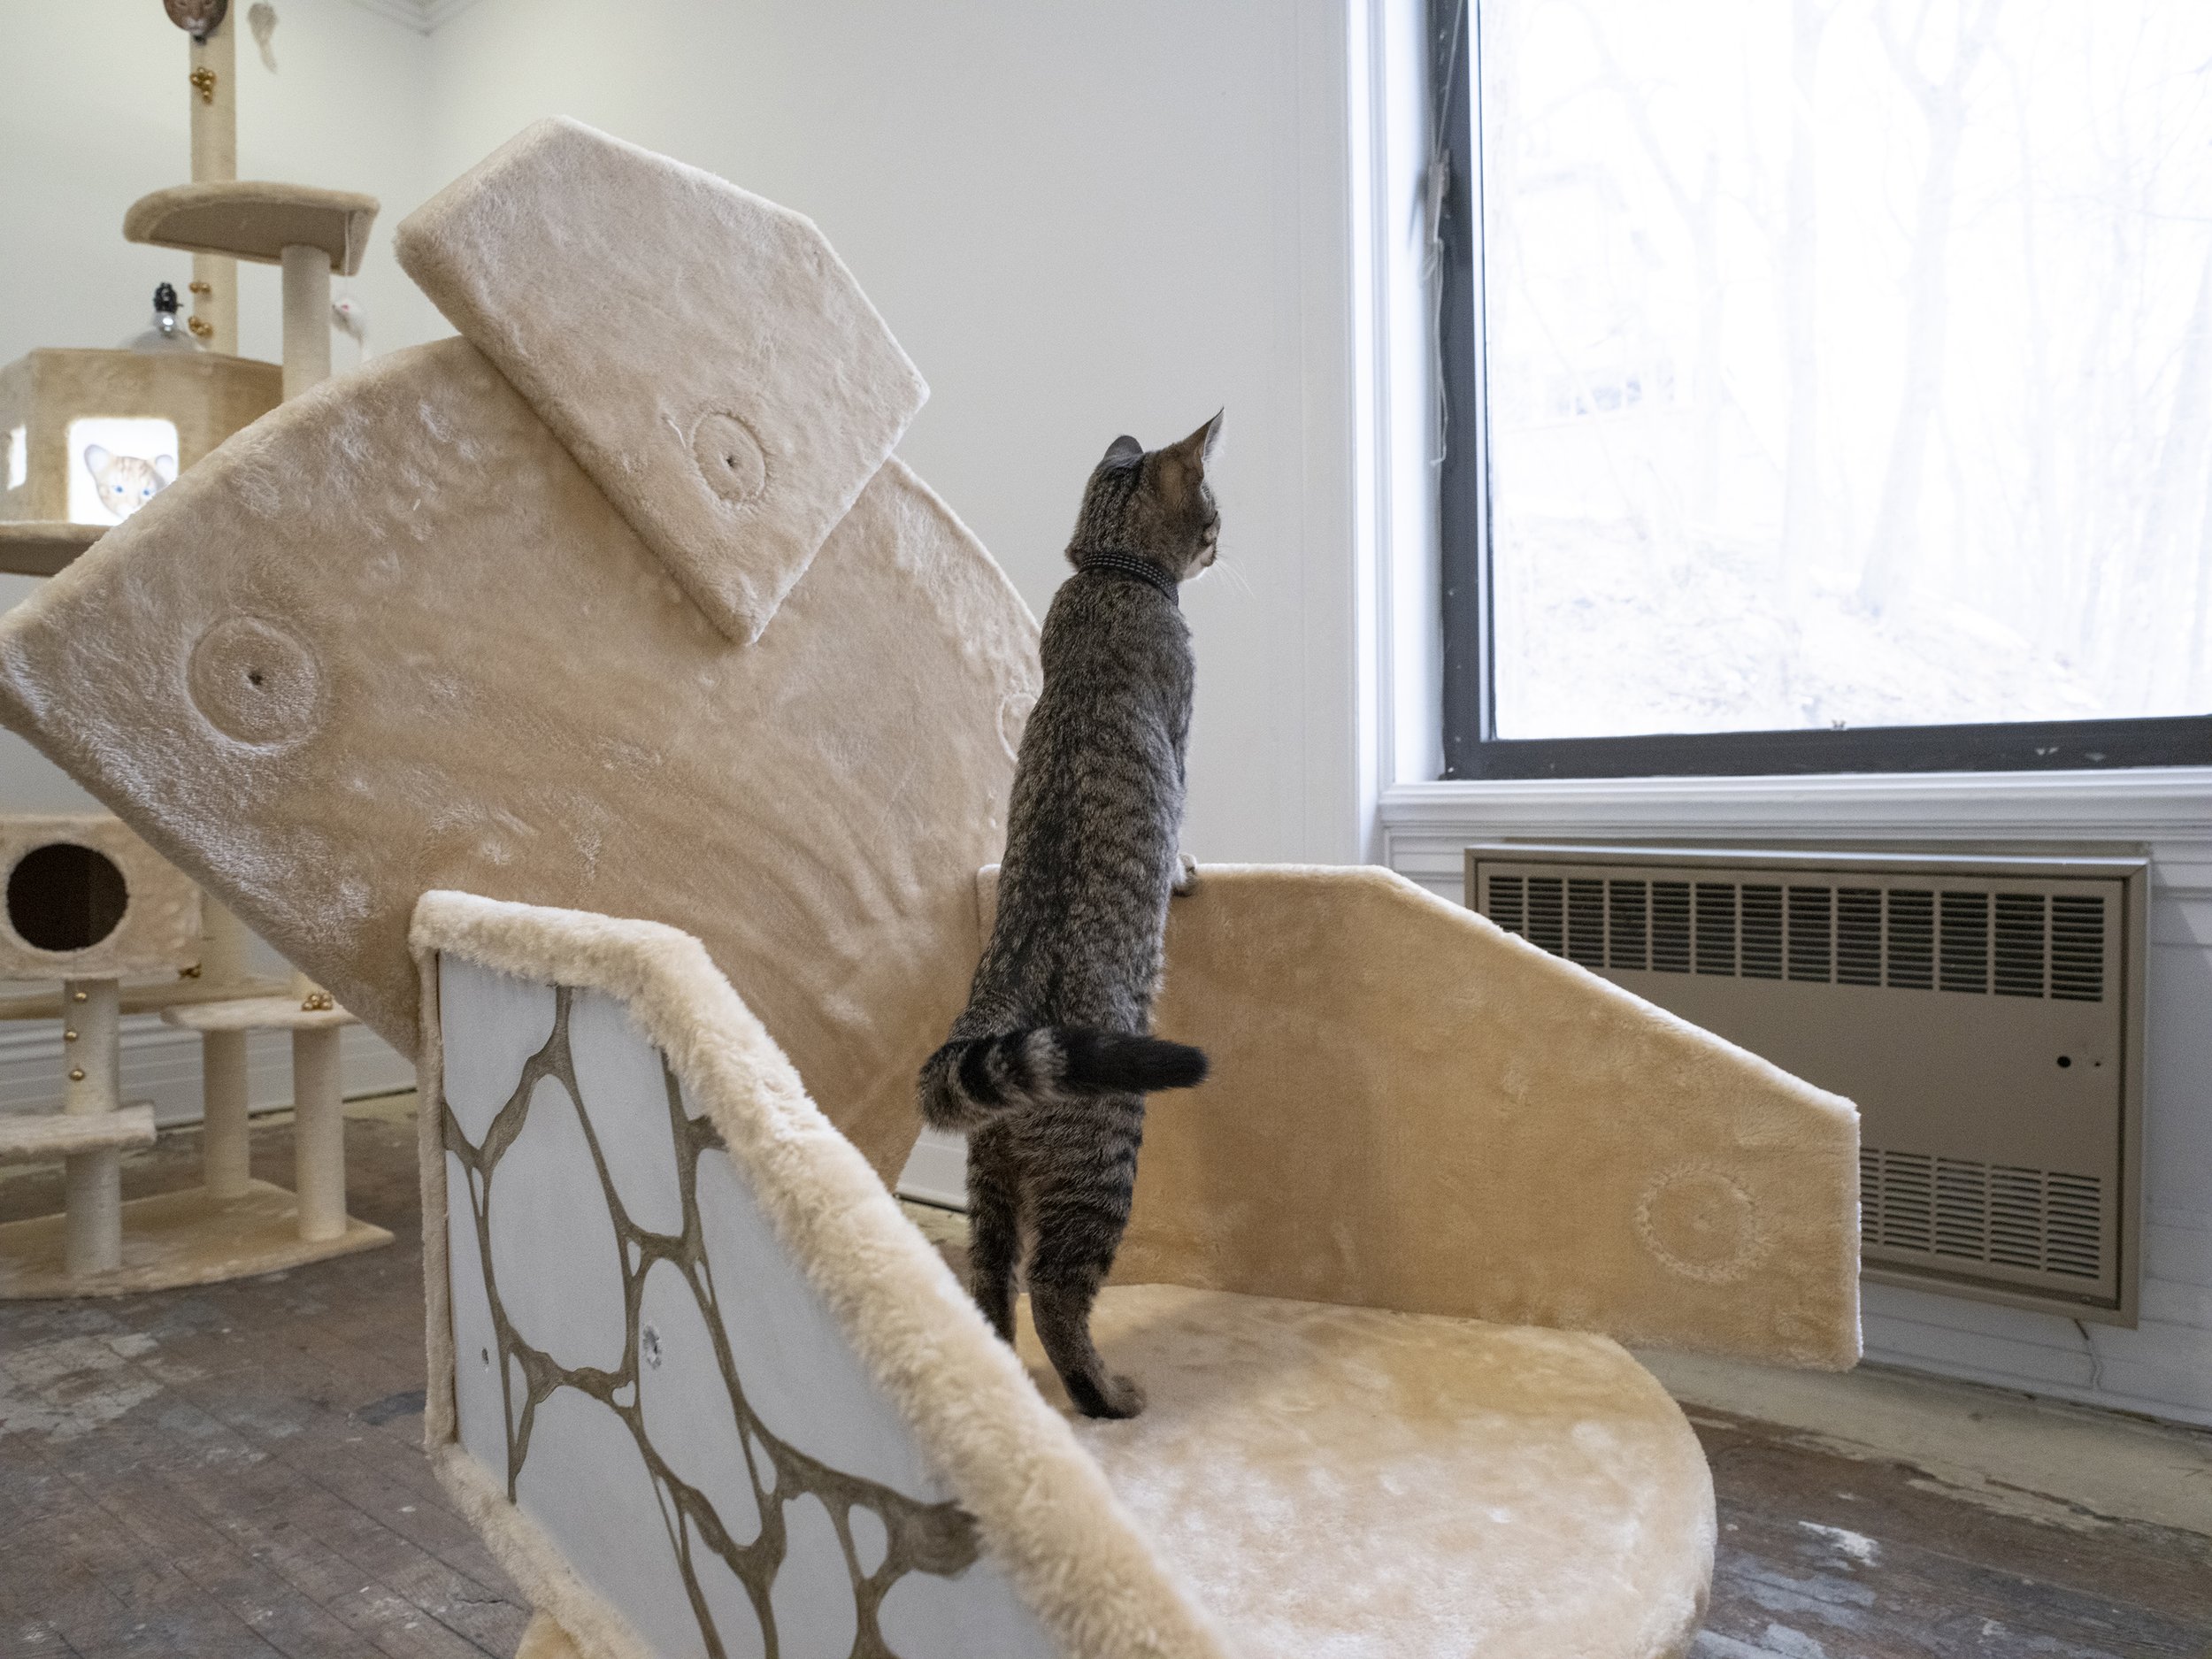 Pangee_CATBOX contemporary presents A Catastrophic Virtue_Installation view with a CAT 01.jpg